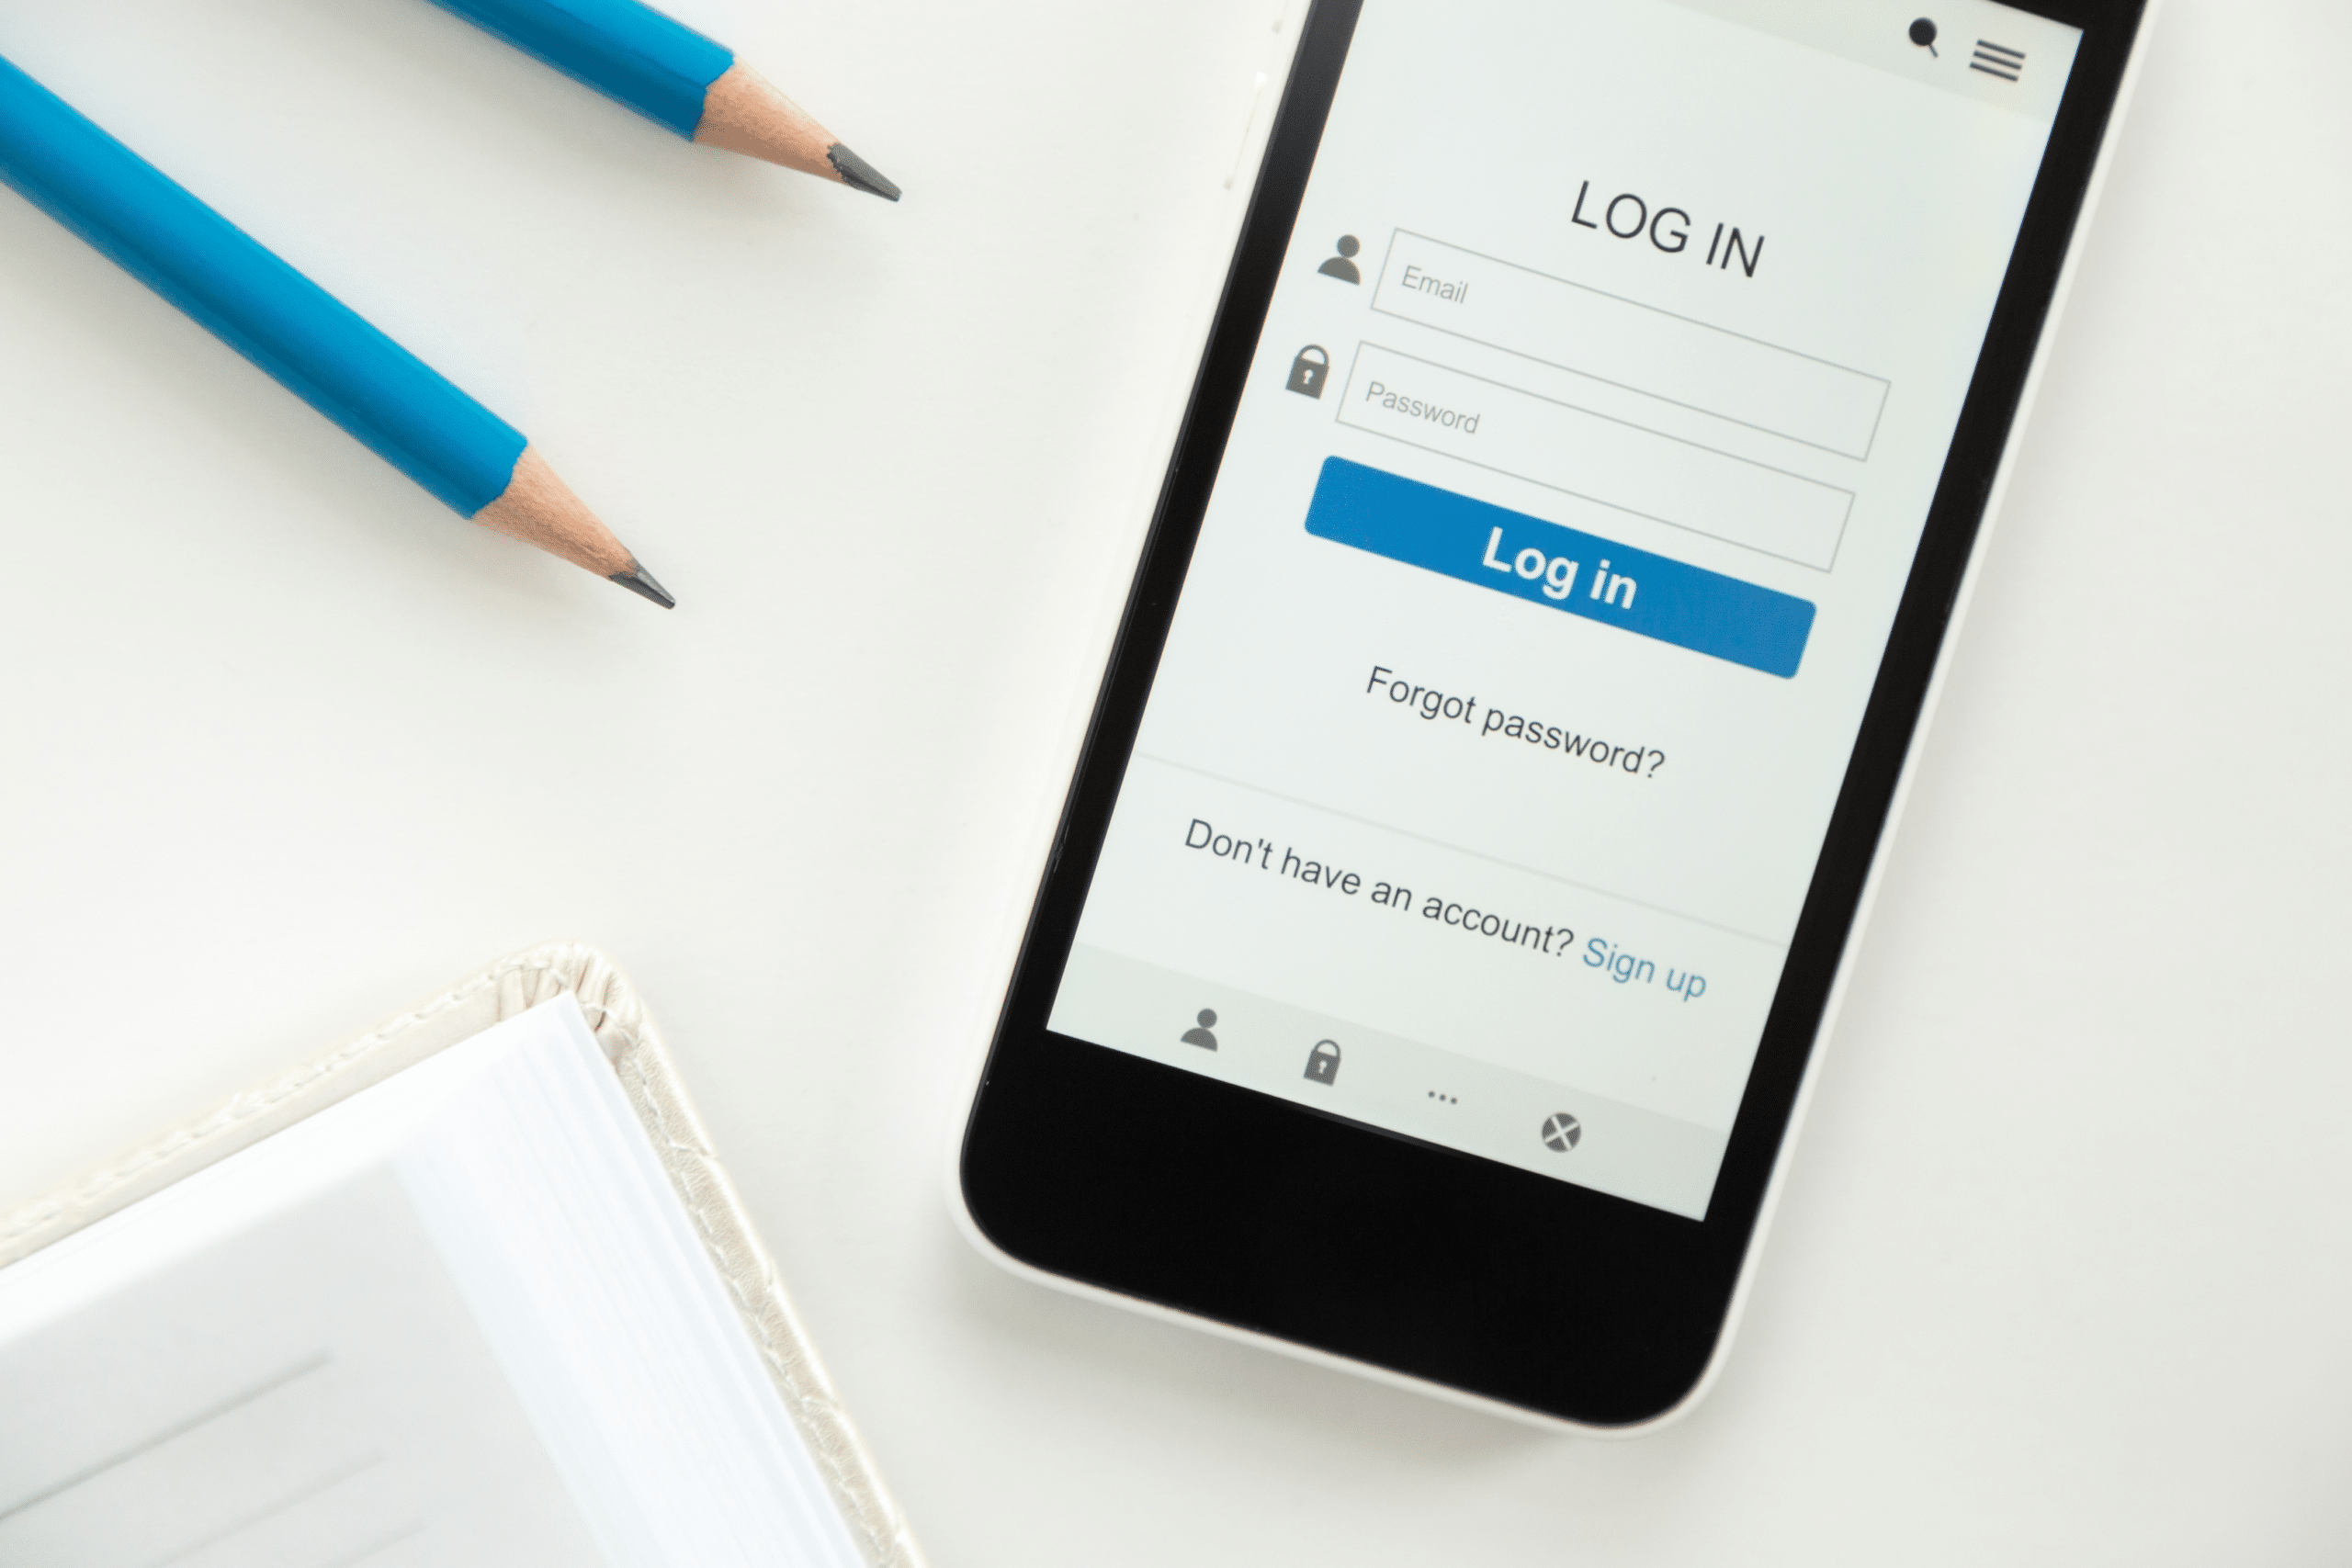 The LinkedIn sign-up and log in page 